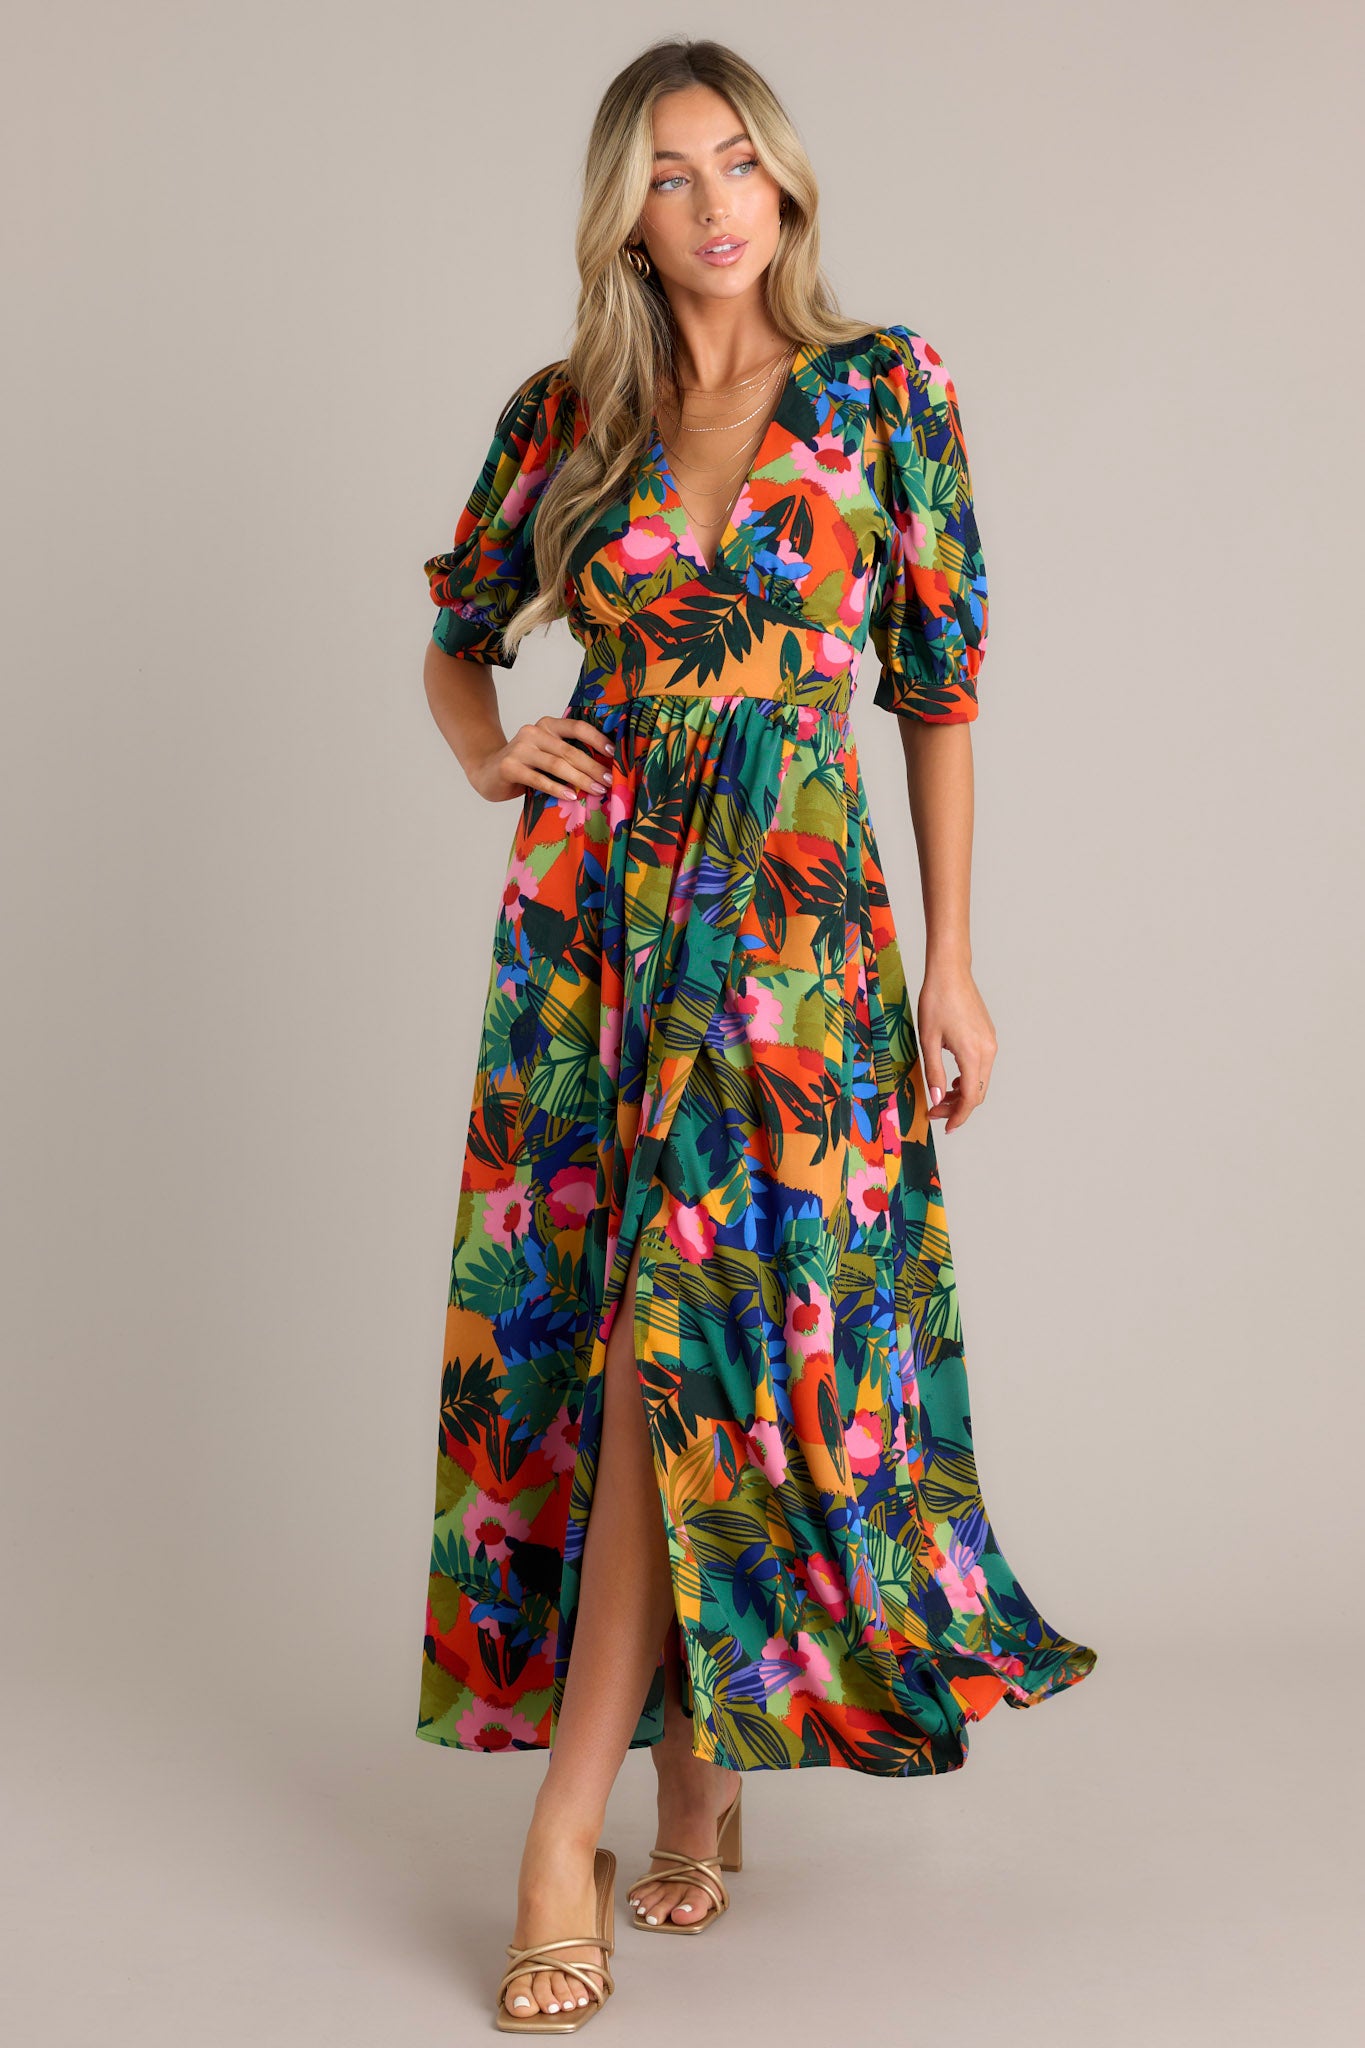 This green multi maxi dress features a plunging v-neckline, a keyhole with button closure in the back, a thick waistband, a smocked back insert with a self-tie feature, button cuffed half sleeves, and a faux wrap design.